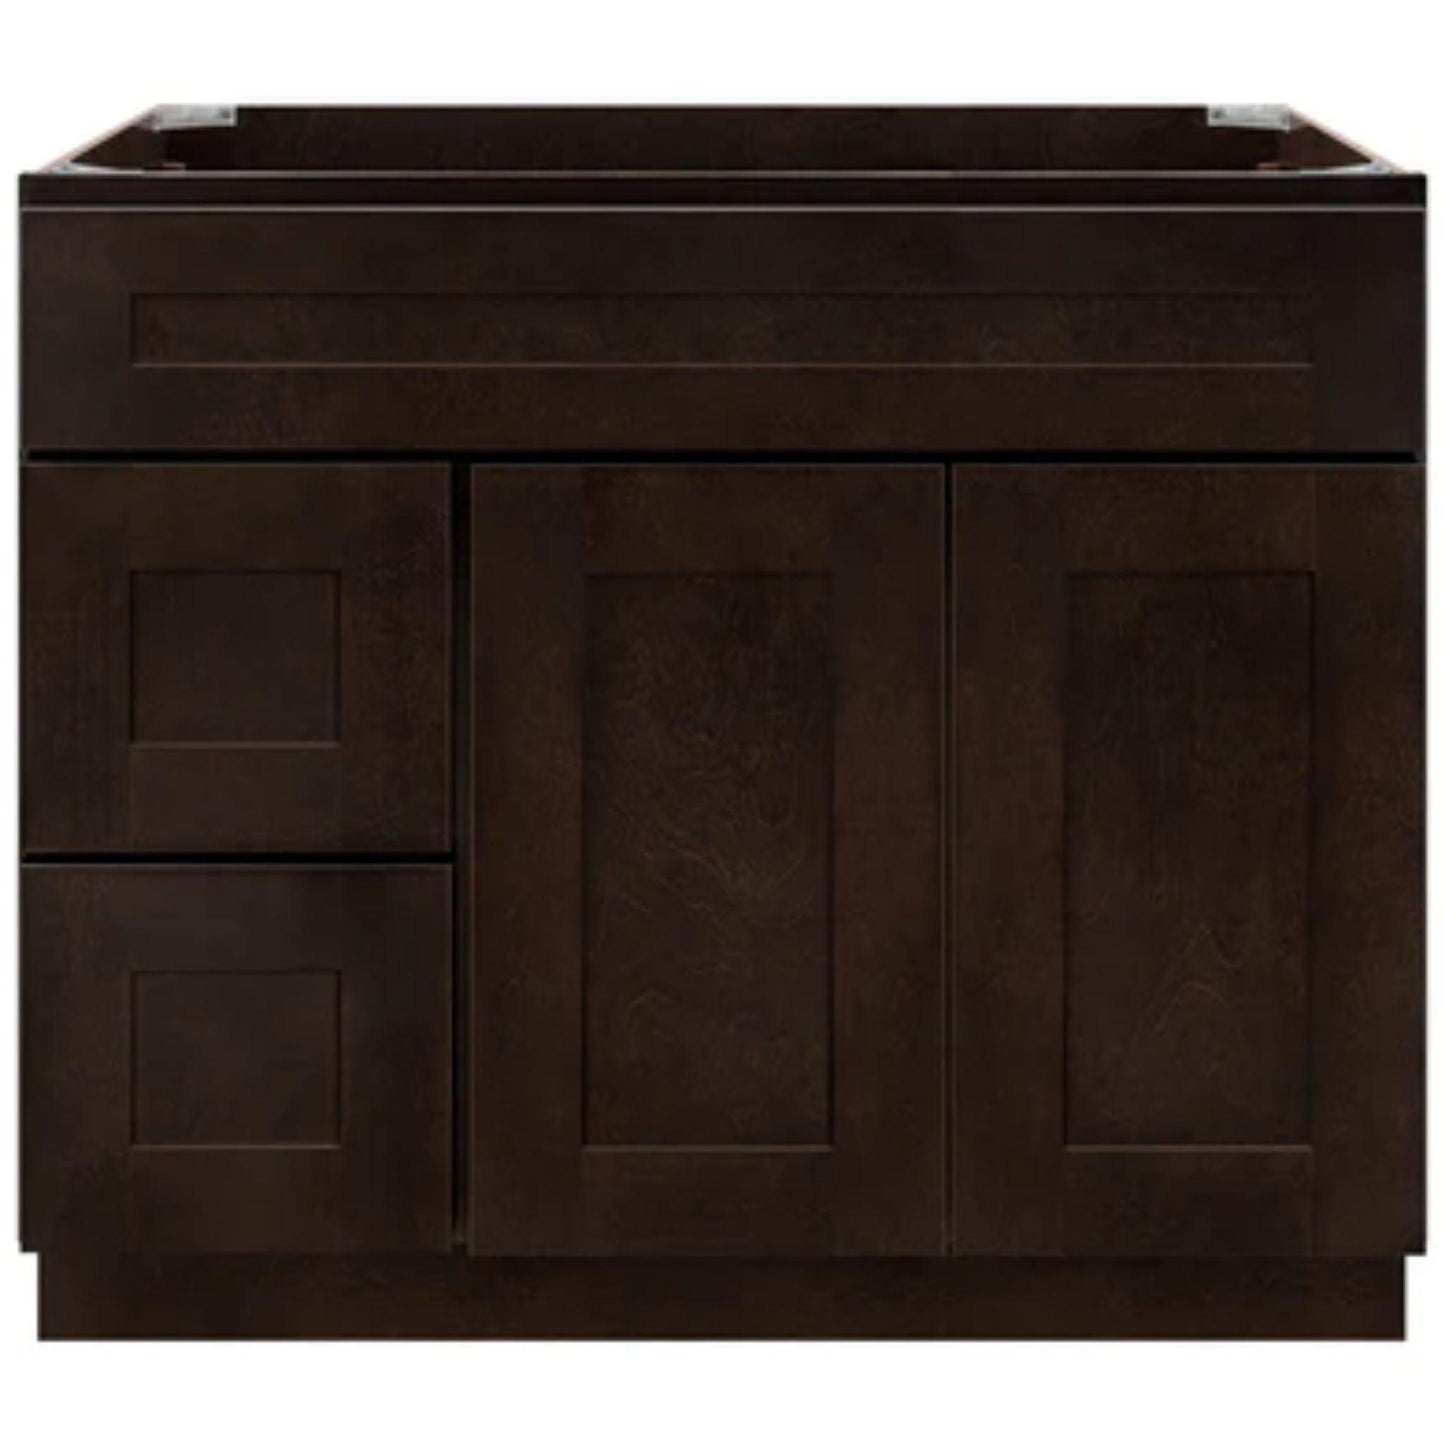 LessCare 36" x 21" x 34 1/2" Espresso Shaker Vanity Sink Base Cabinet with Left Drawers